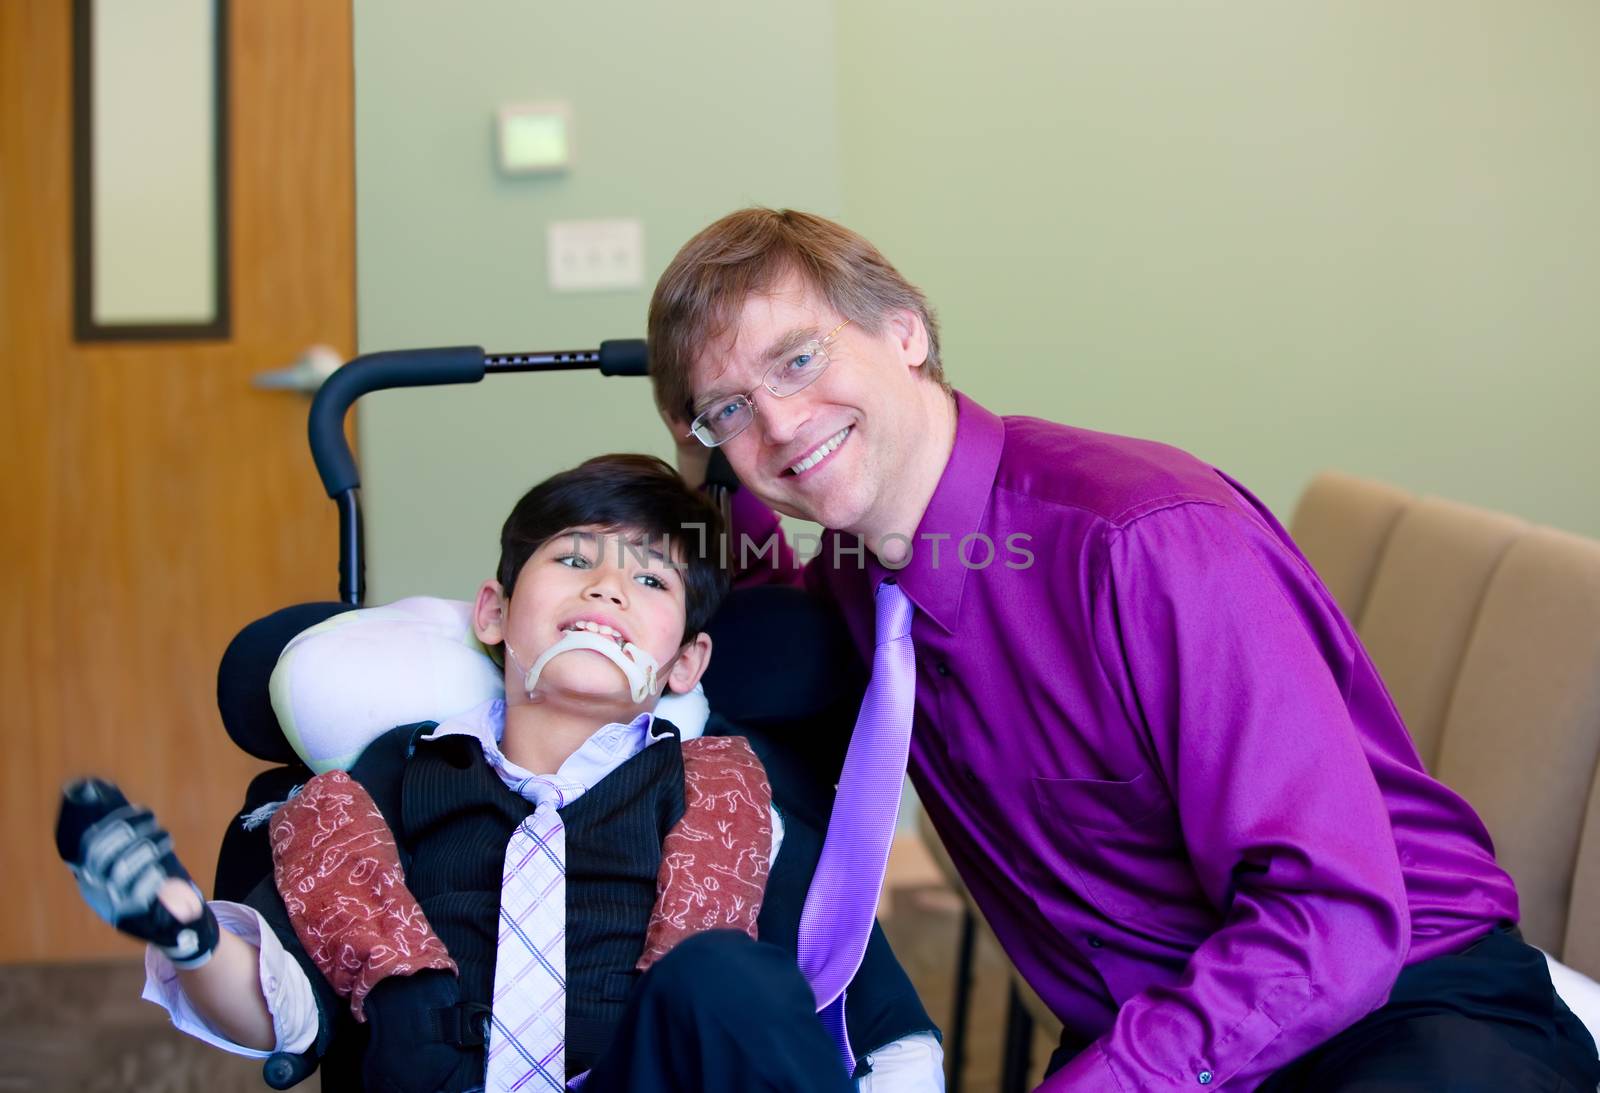 Caucasian father in purple dresshirt and necktie sitting next to biracial disabled son in wheelchair